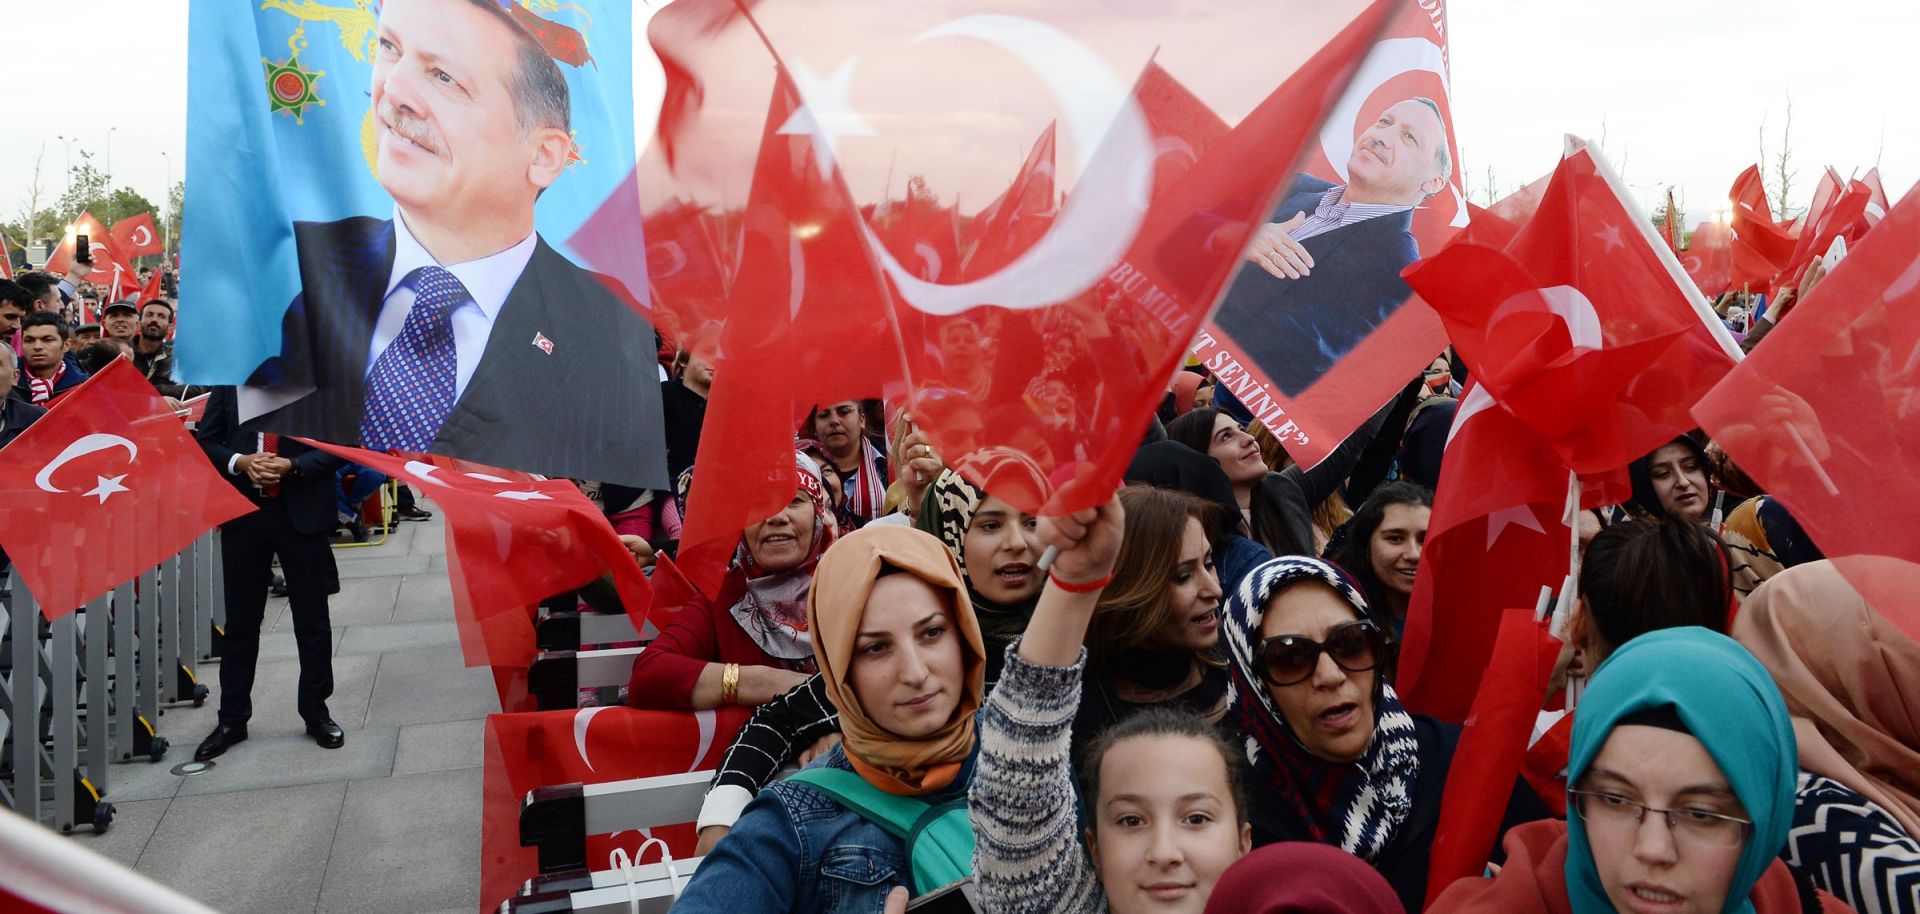 The West's disapproval helped the Turkish president tap a nationalist vein and carry his constitutional victory.